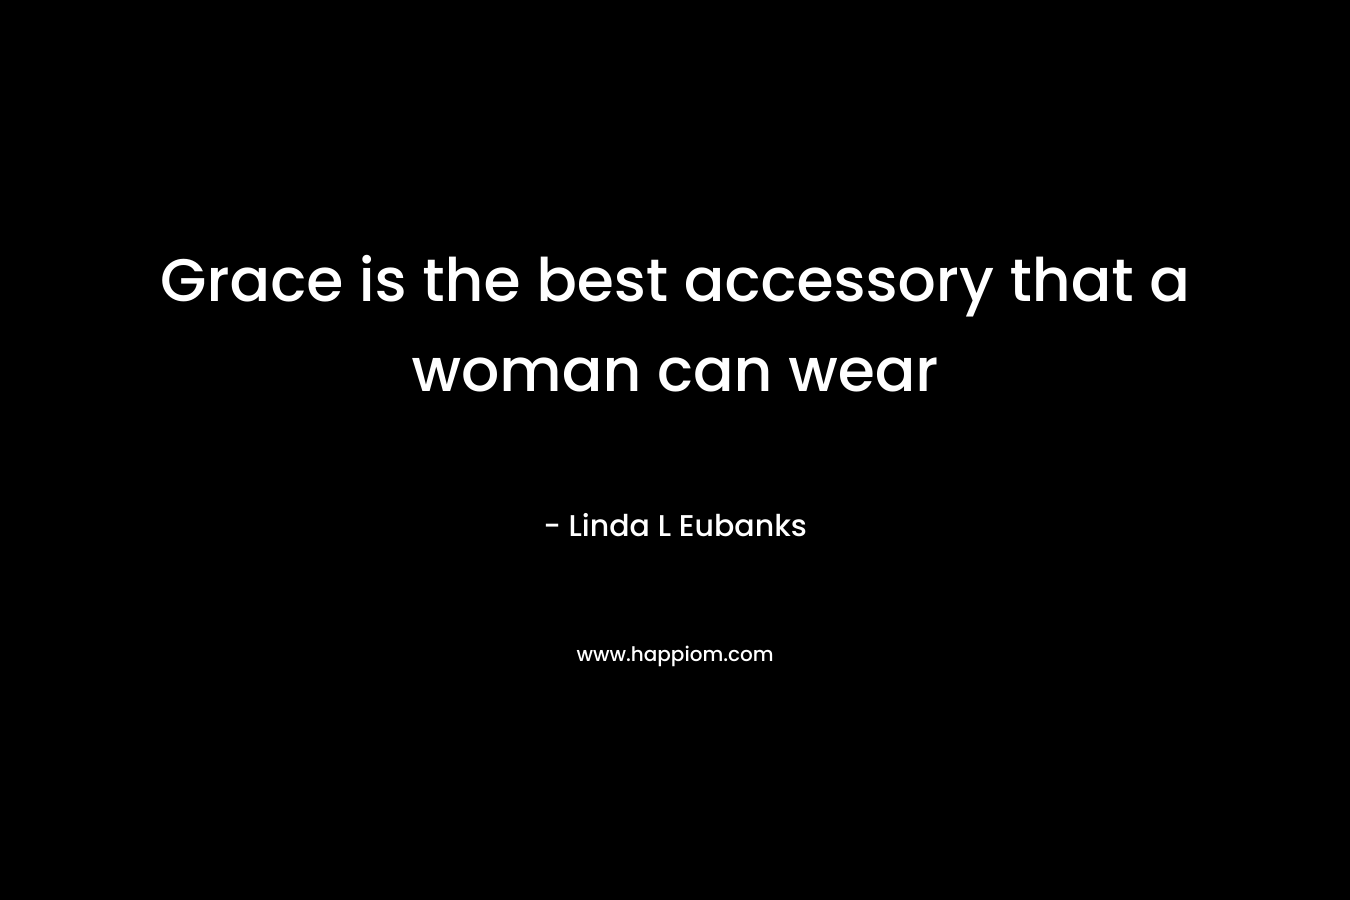 Grace is the best accessory that a woman can wear